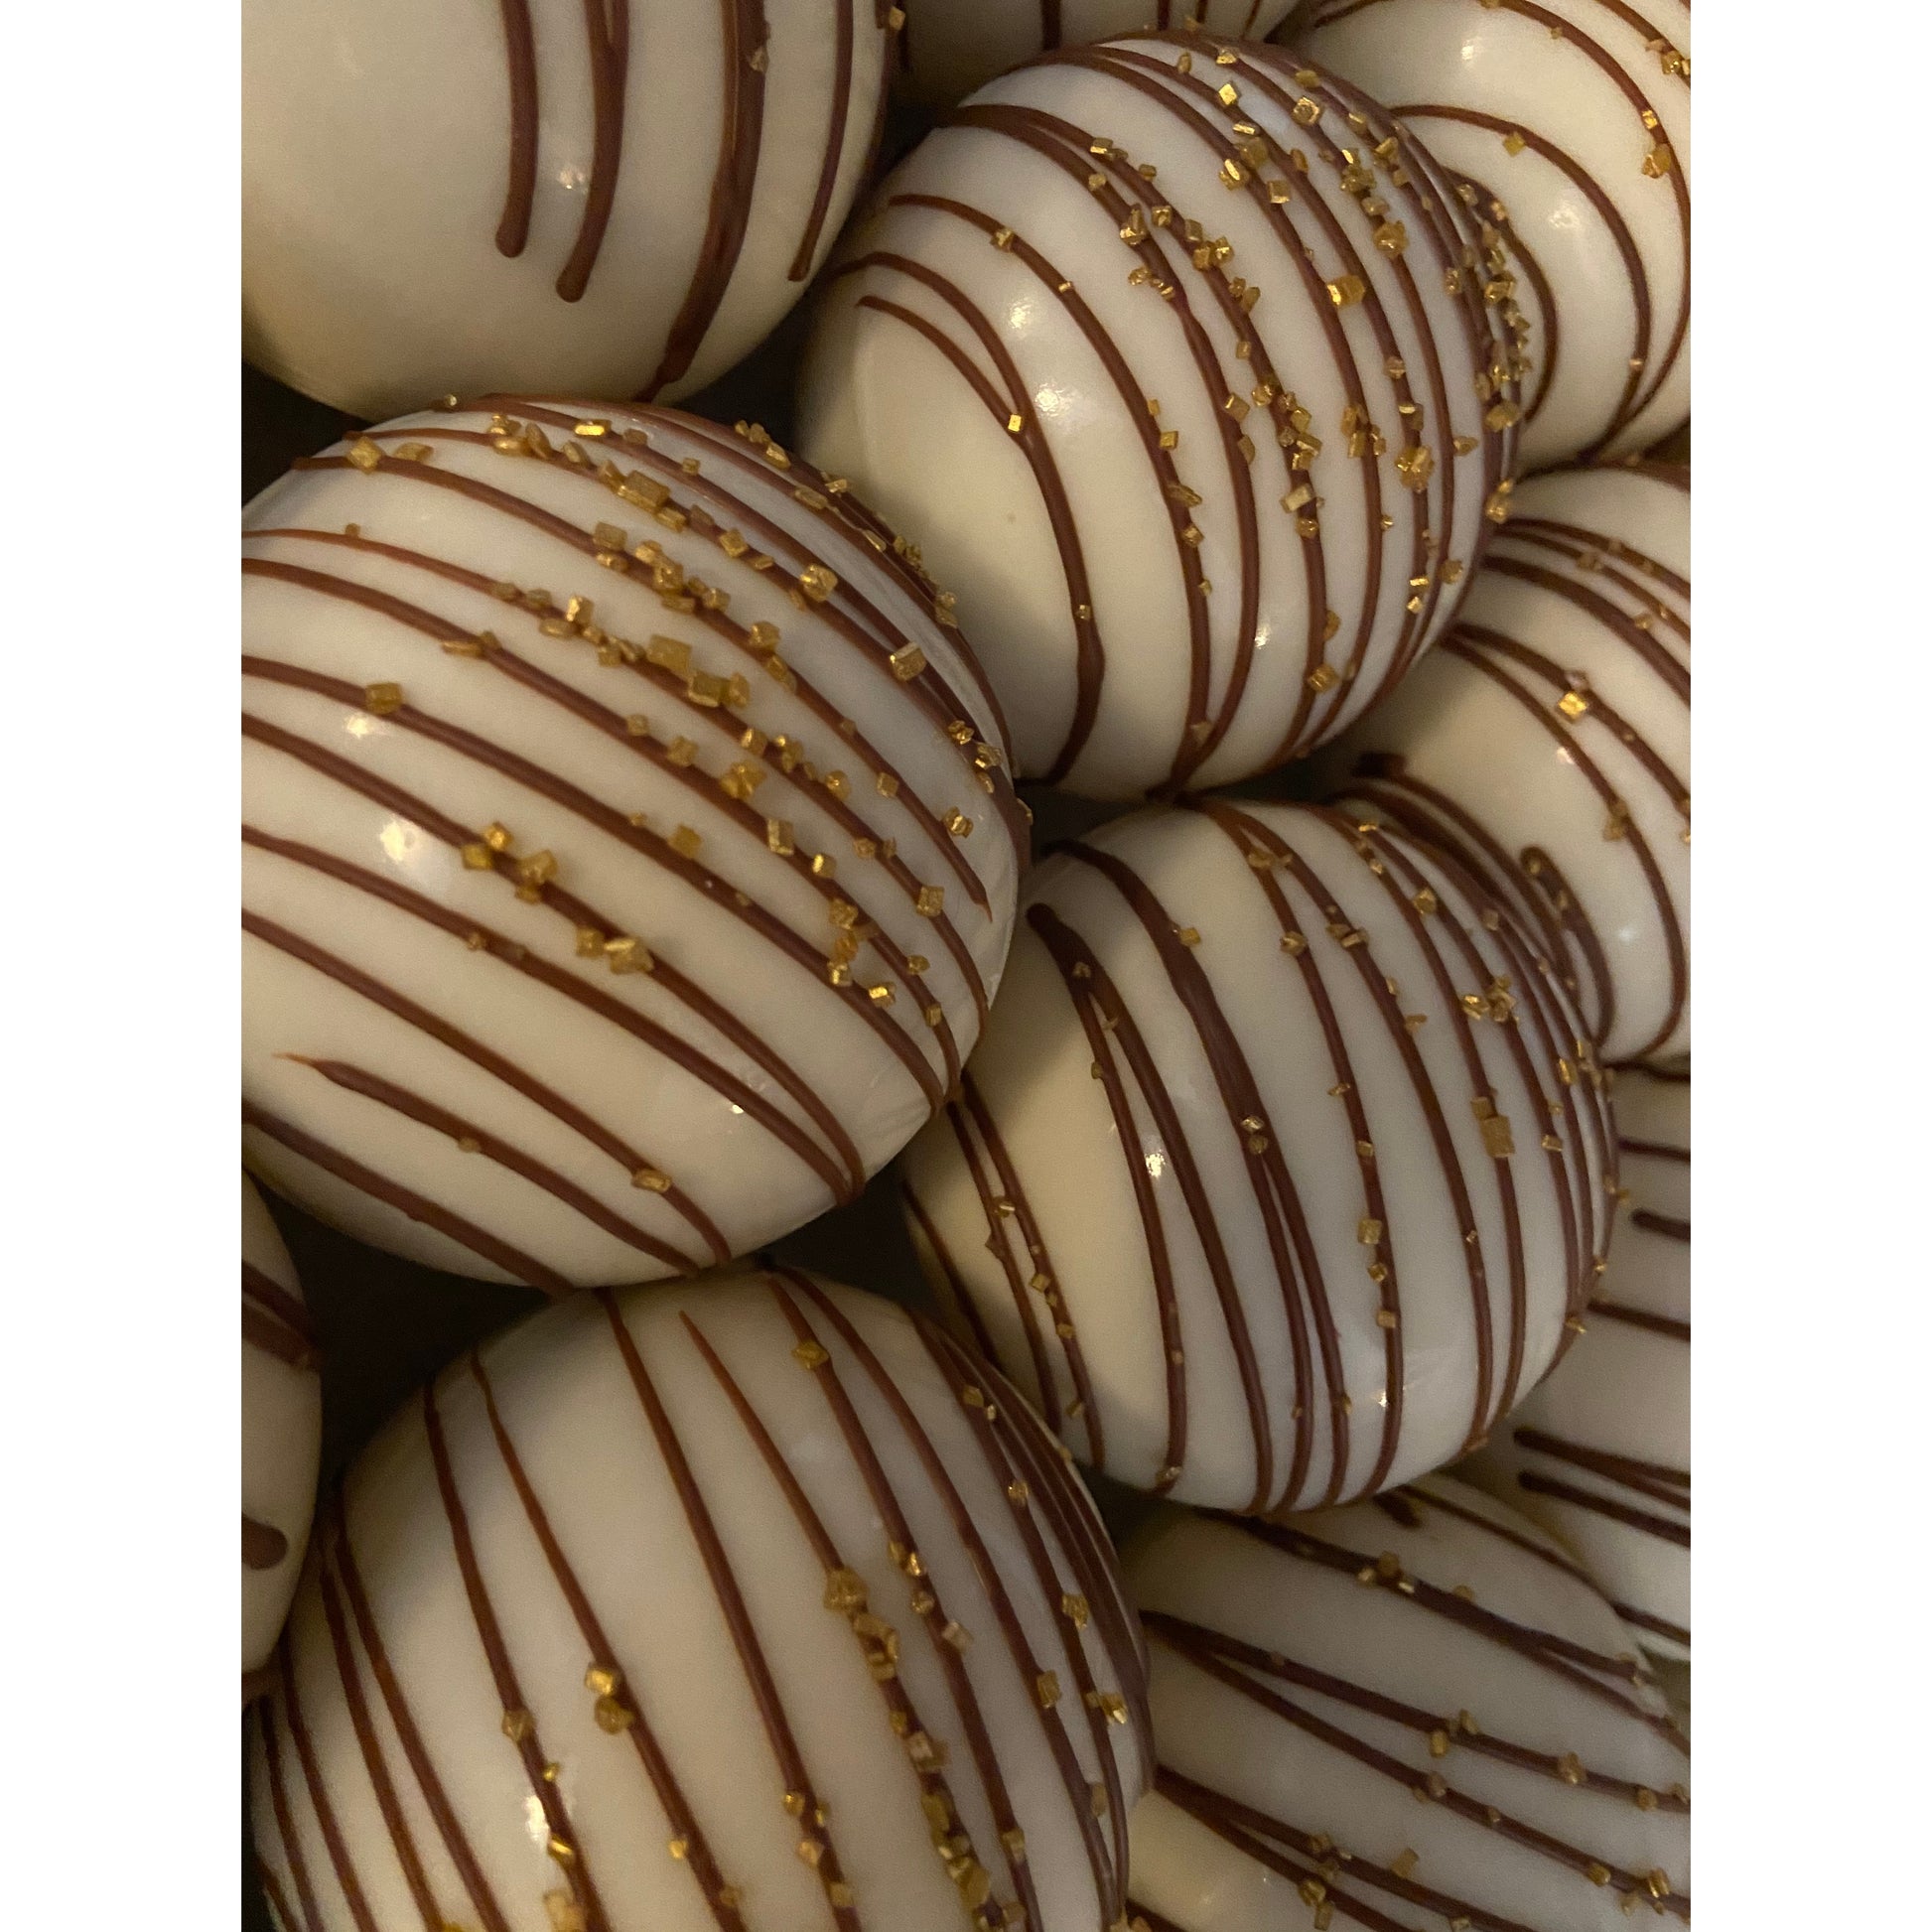 White Chocolate Caramel Cappuccino Bomb - Storm and Sky Shoppe